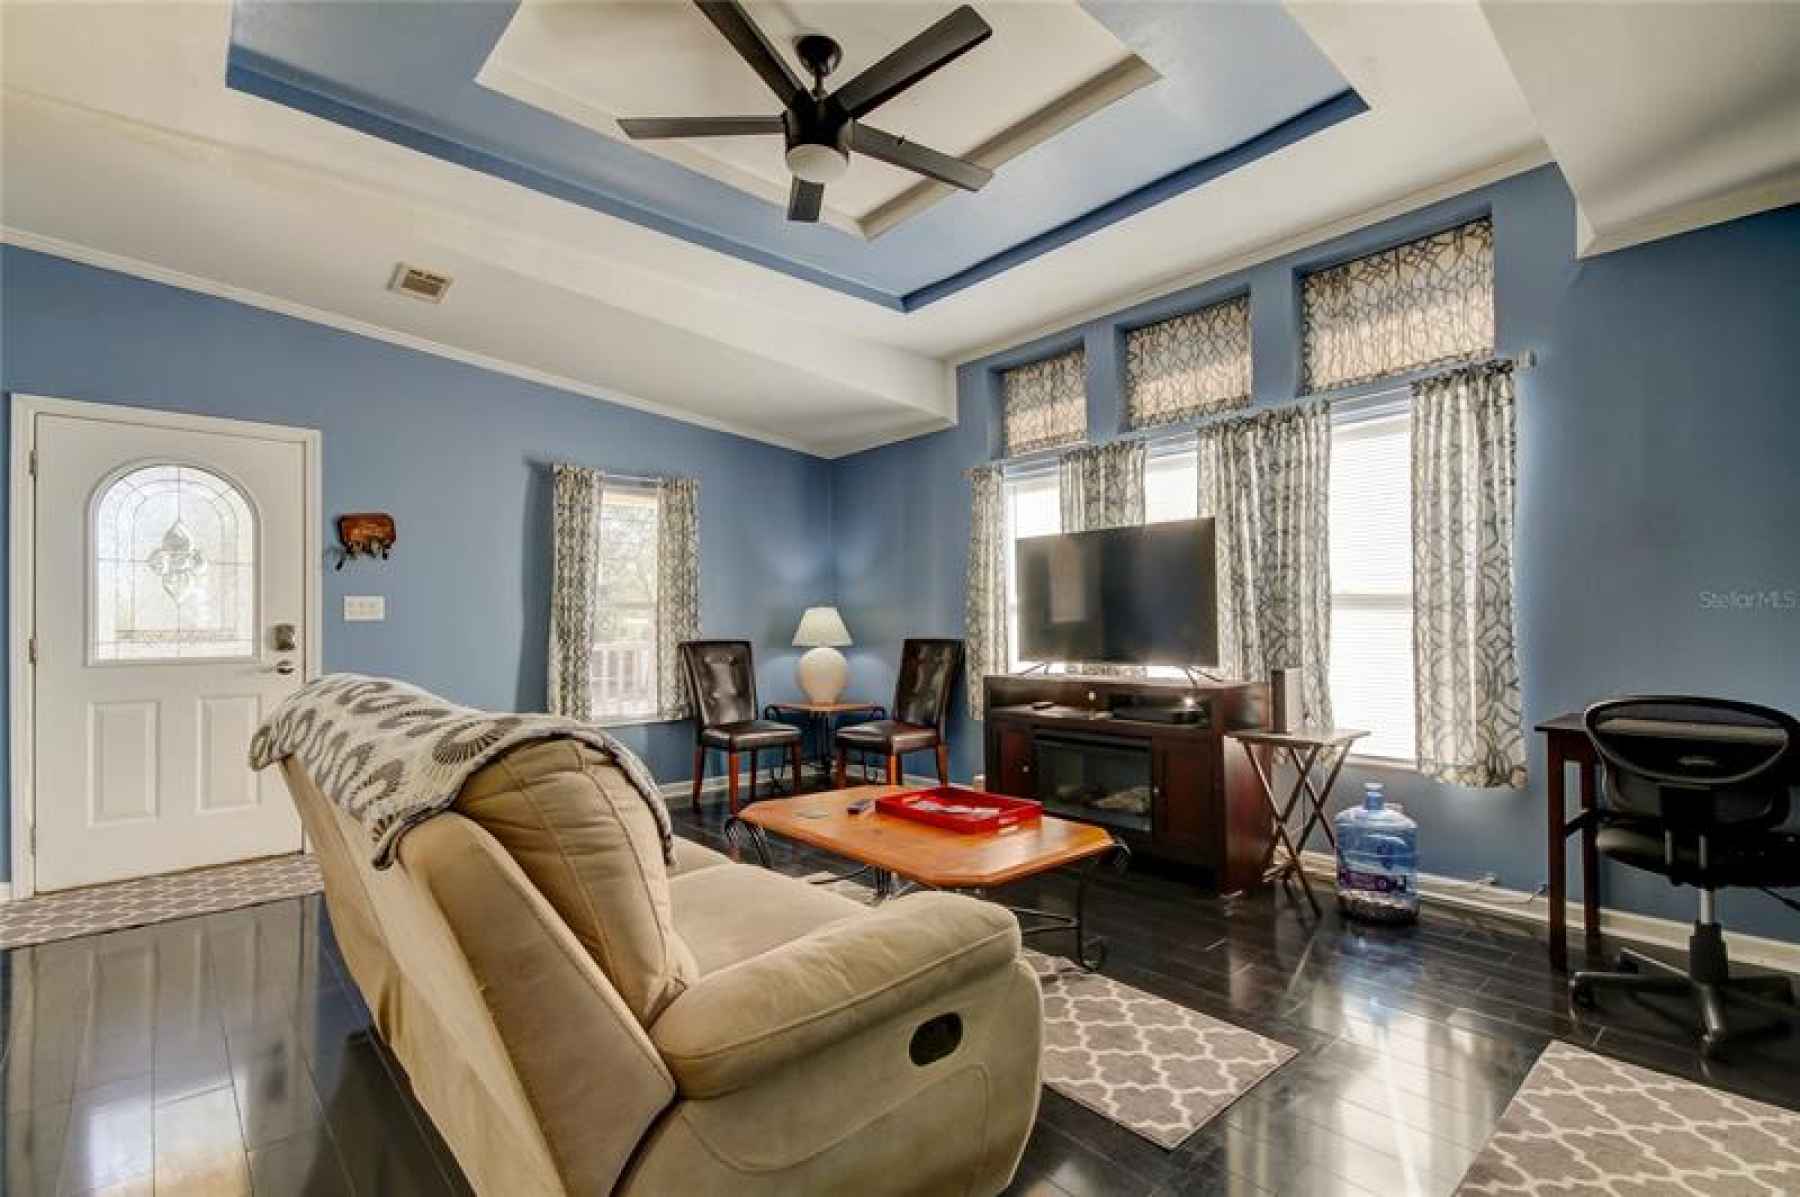 SPACIOUS LIVING ROOM WITH COFFERED CEILINGS!